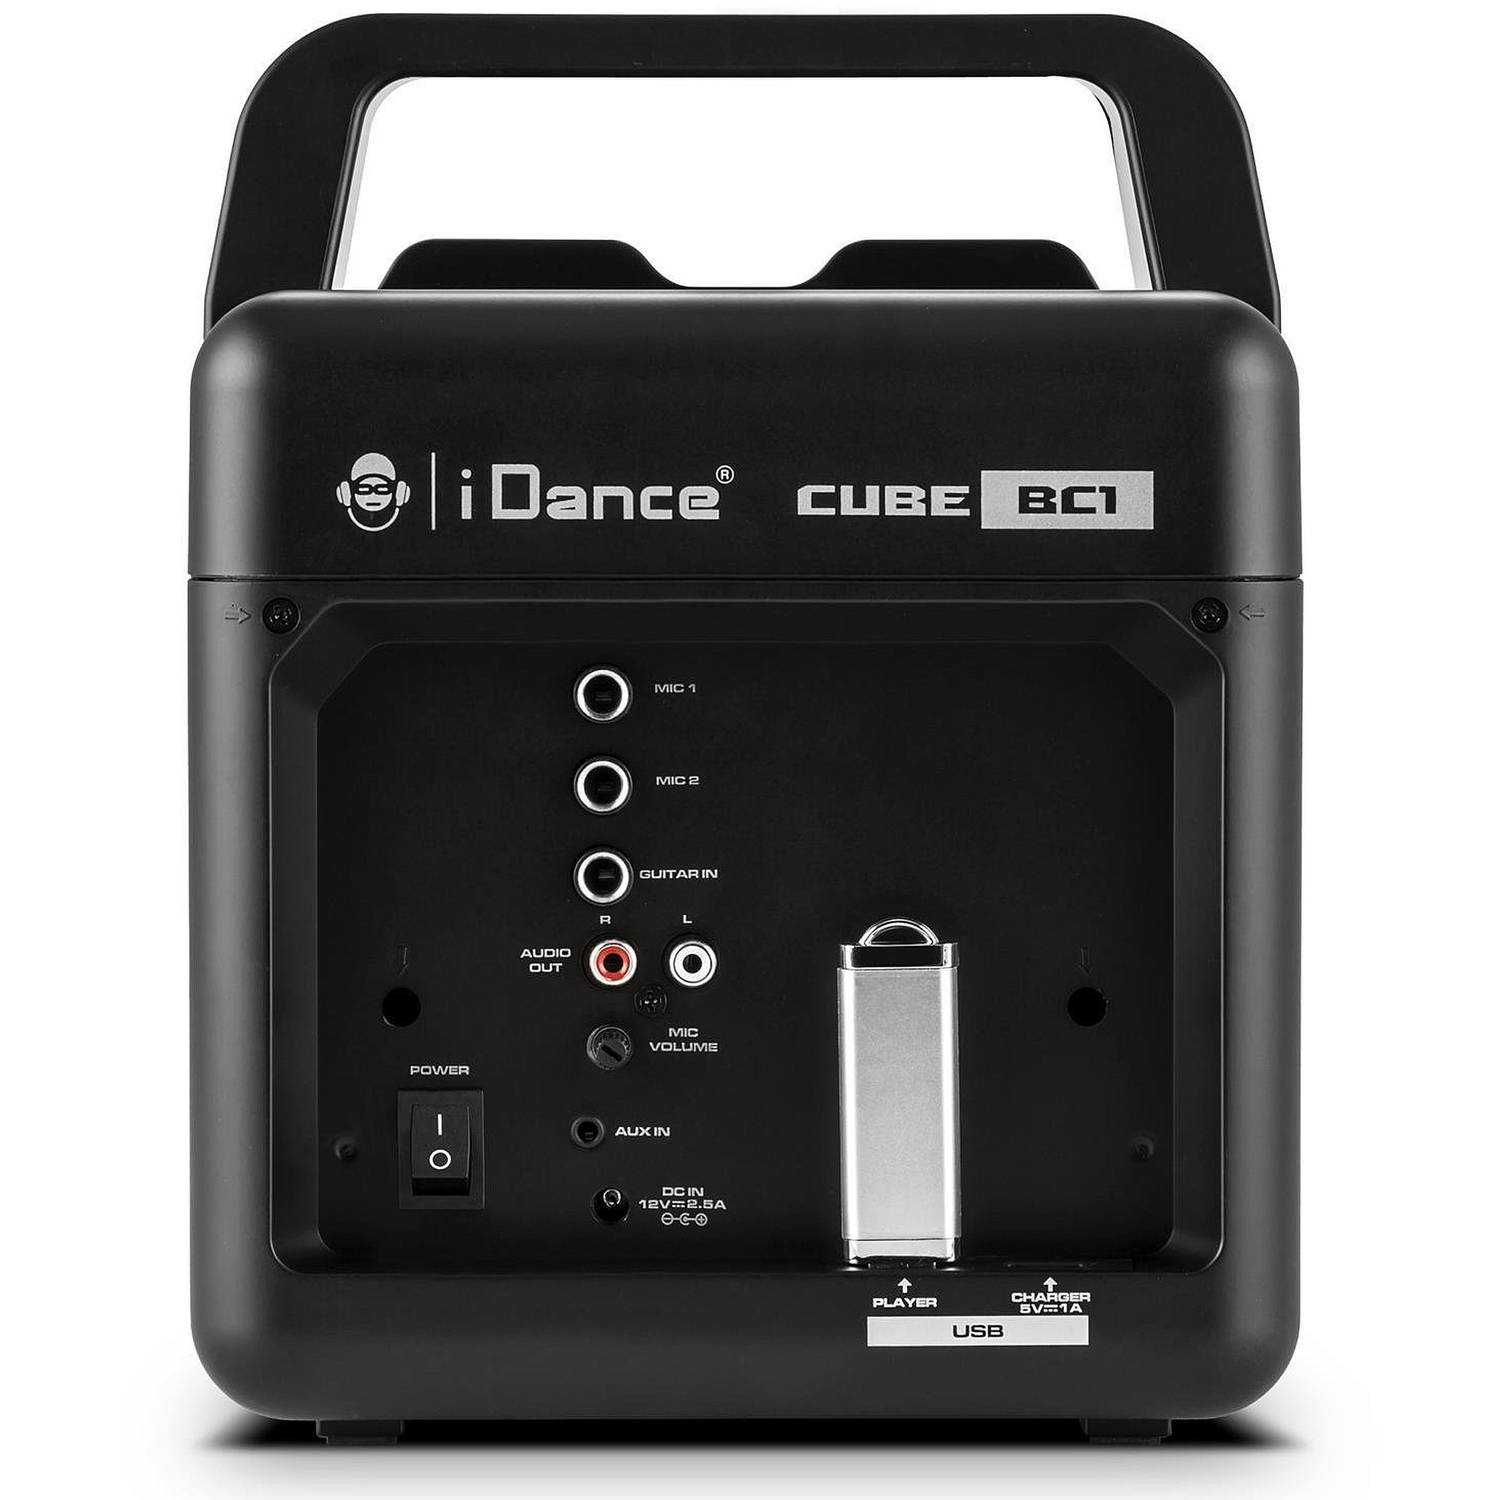 iDance Mobile Cube Portable Bluetooth Speaker with LCD Display, Black, BC1 - image 2 of 3